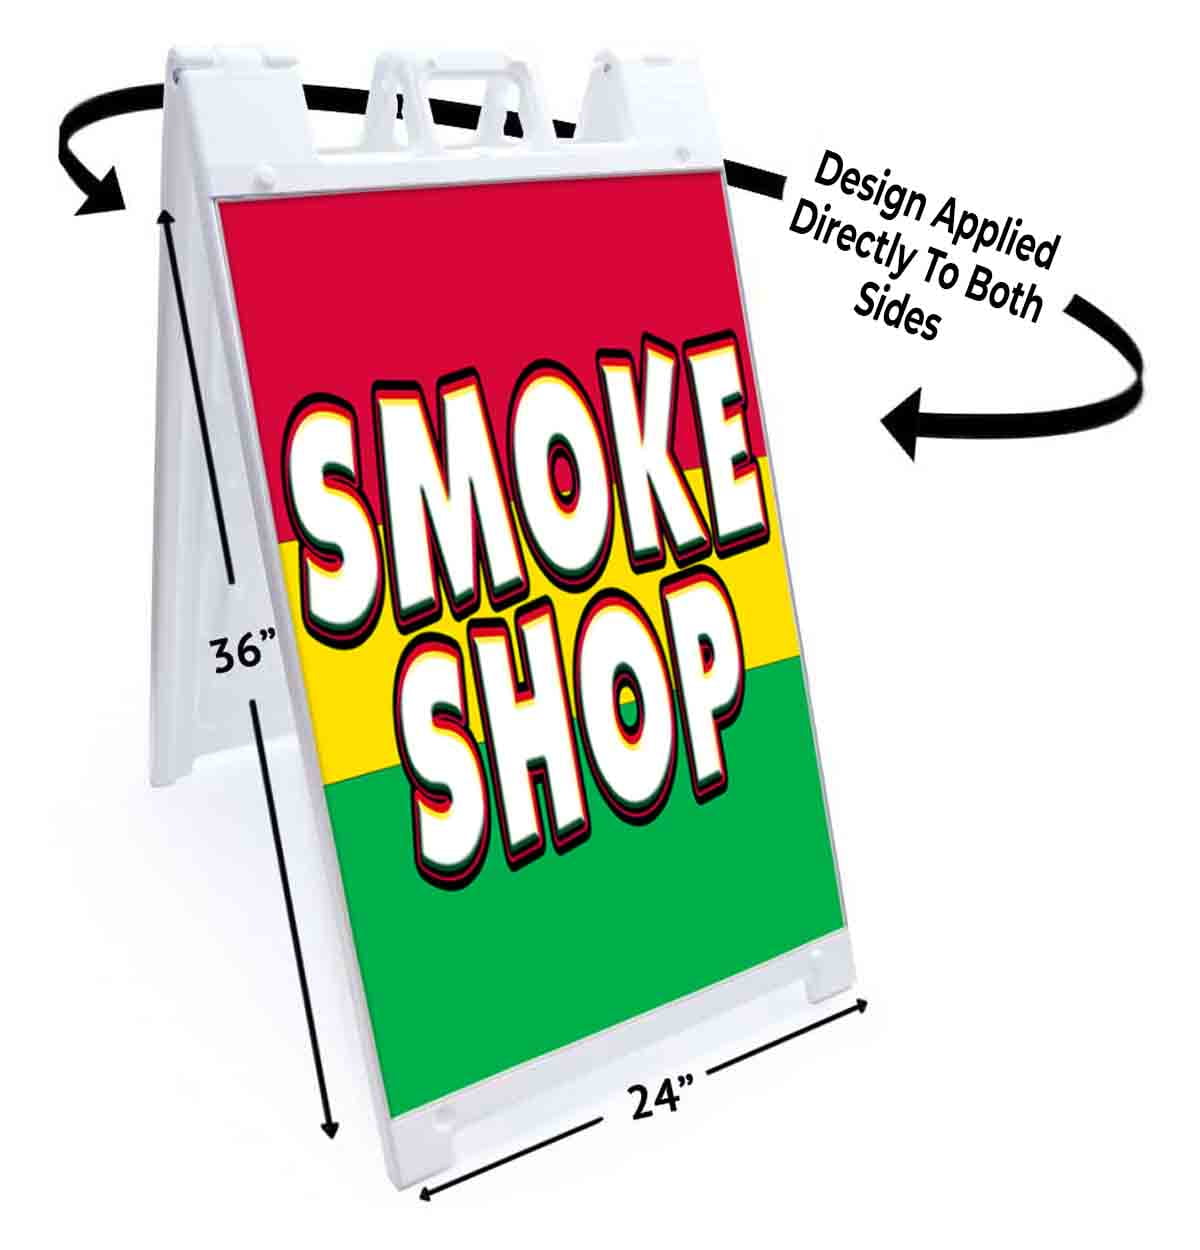 Smoke Shop (24 X 36) Standard A-Frame Signicade, Includes Decal